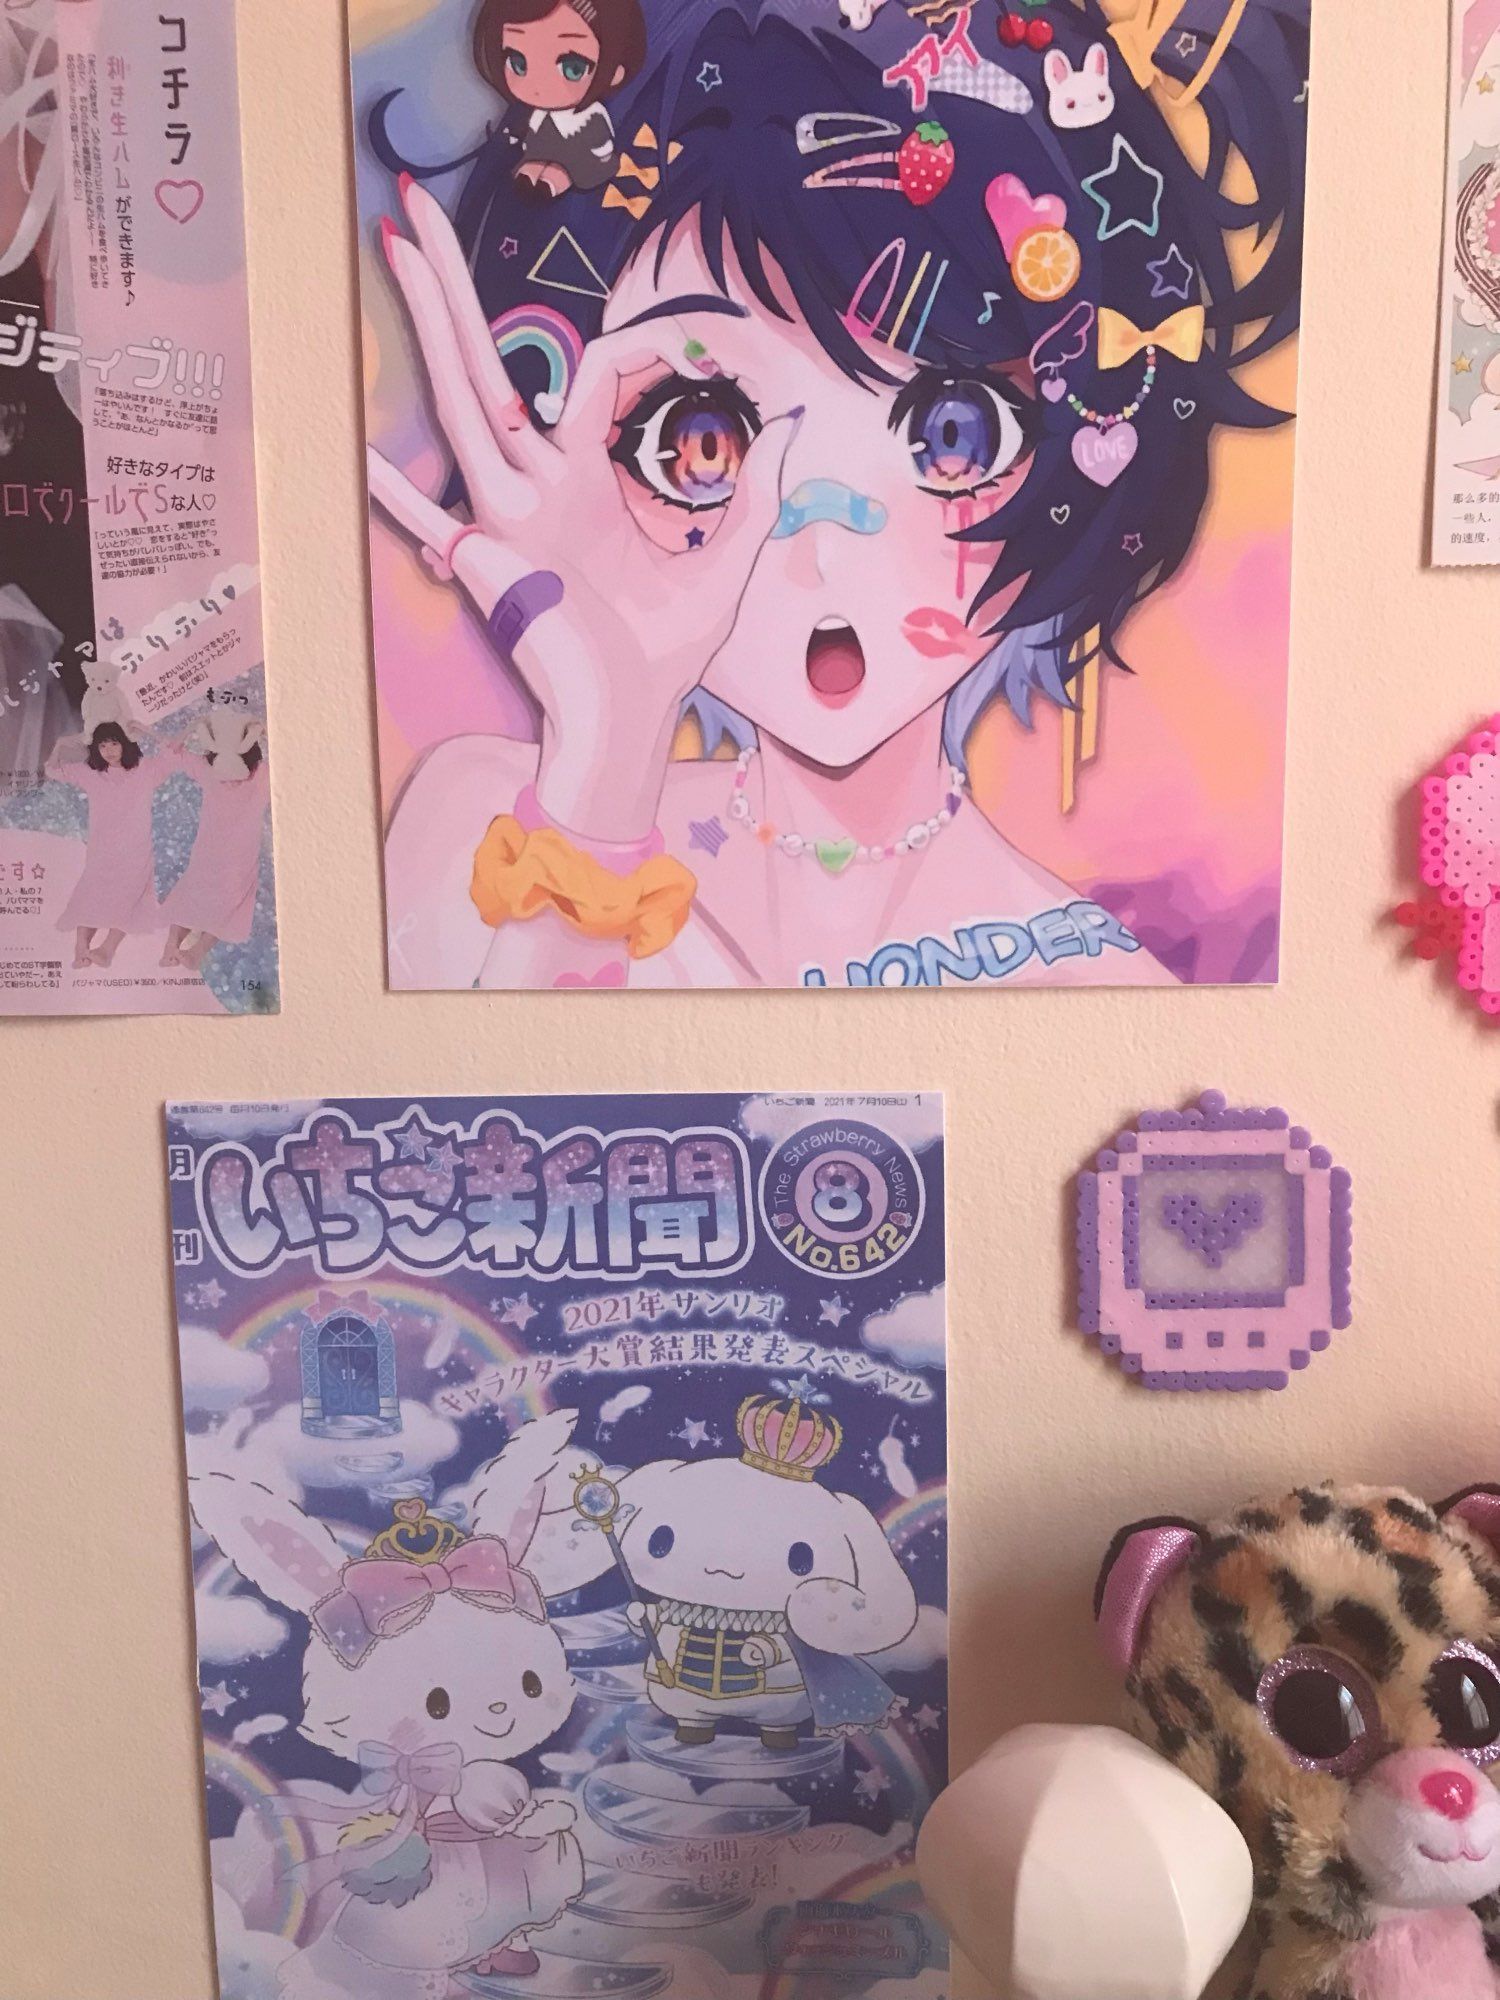 A wall with posters of anime characters and stickers. - Animecore